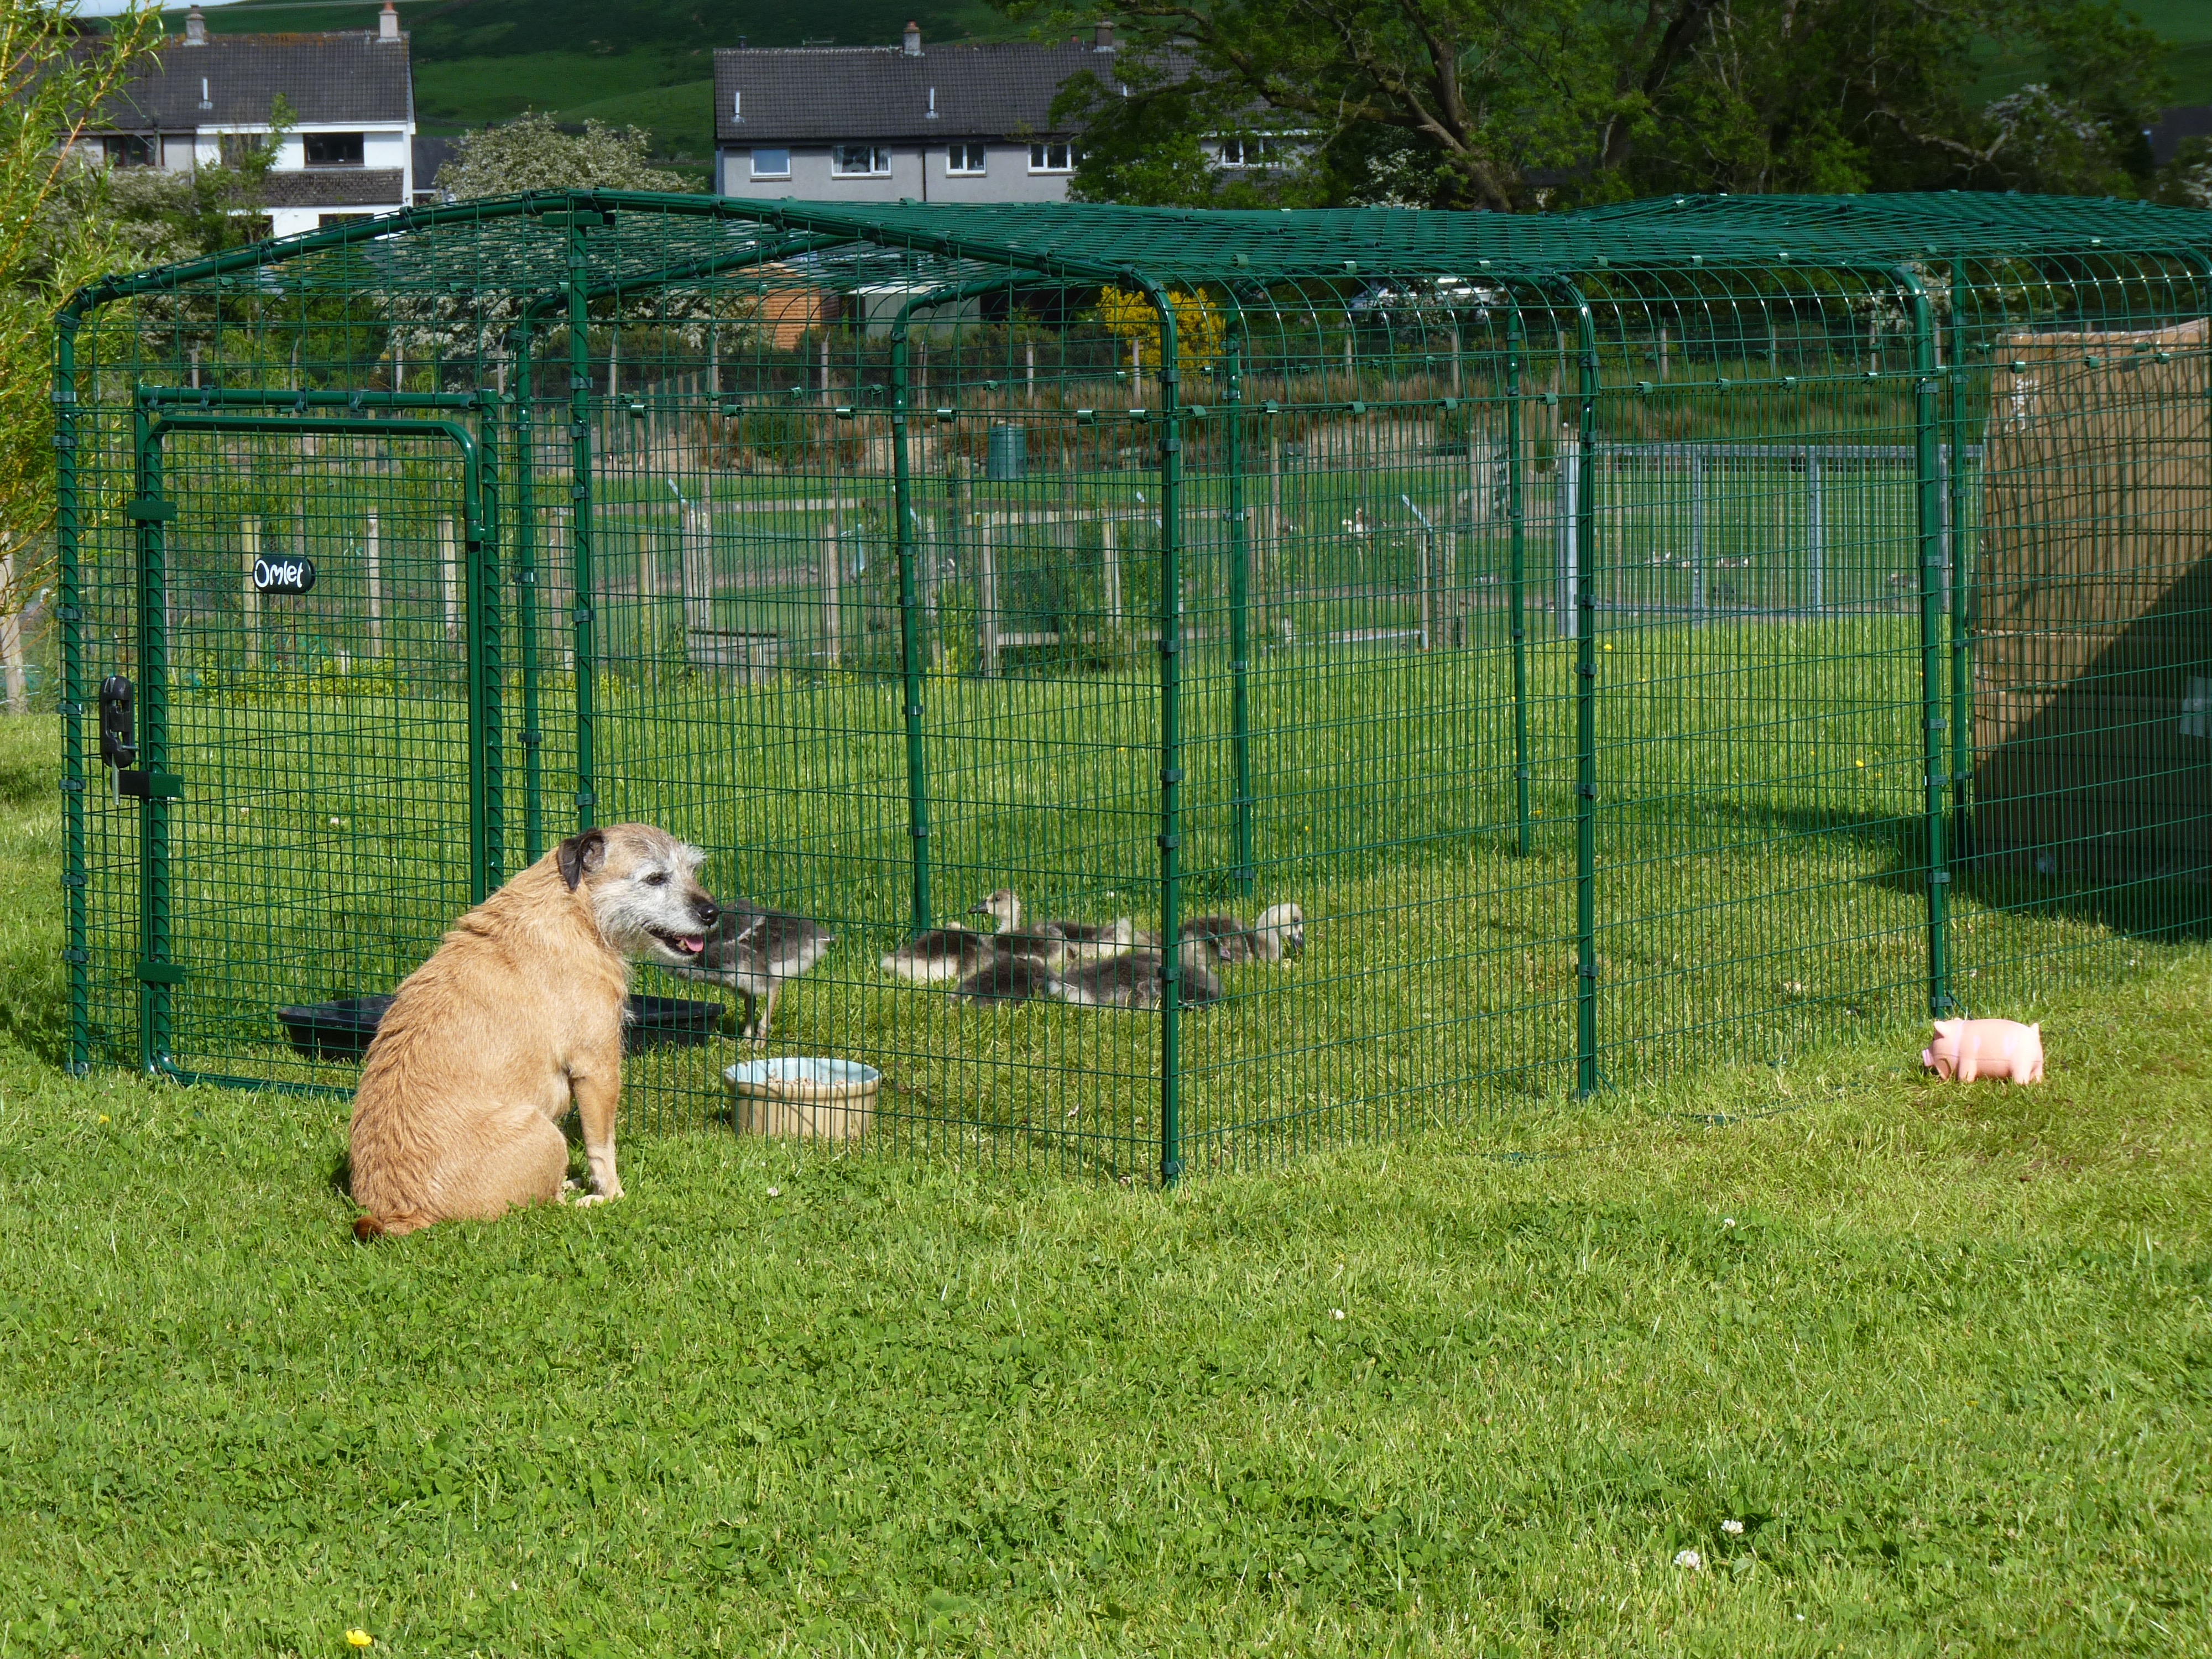 A dog watching some chickens in their run